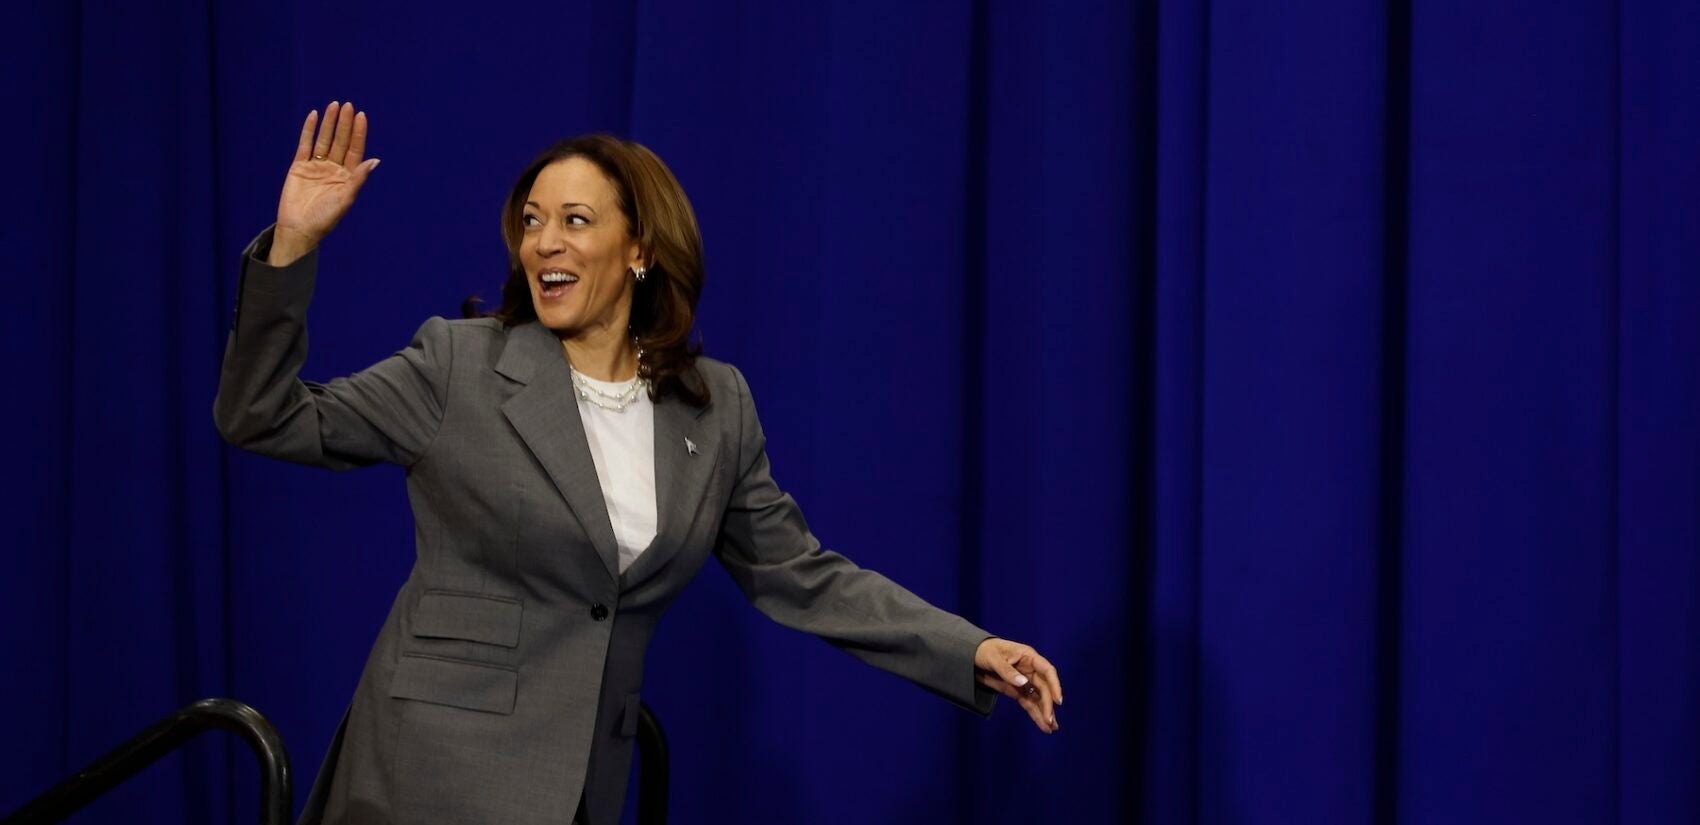 Vice President Harris arrives to deliver remarks on reproductive rights at the University of Maryland on June 24, 2024, the second anniversary of the Supreme Court ruling that overturned Roe v. Wade. (Kevin Dietsch/Getty Images/Getty Images North America)